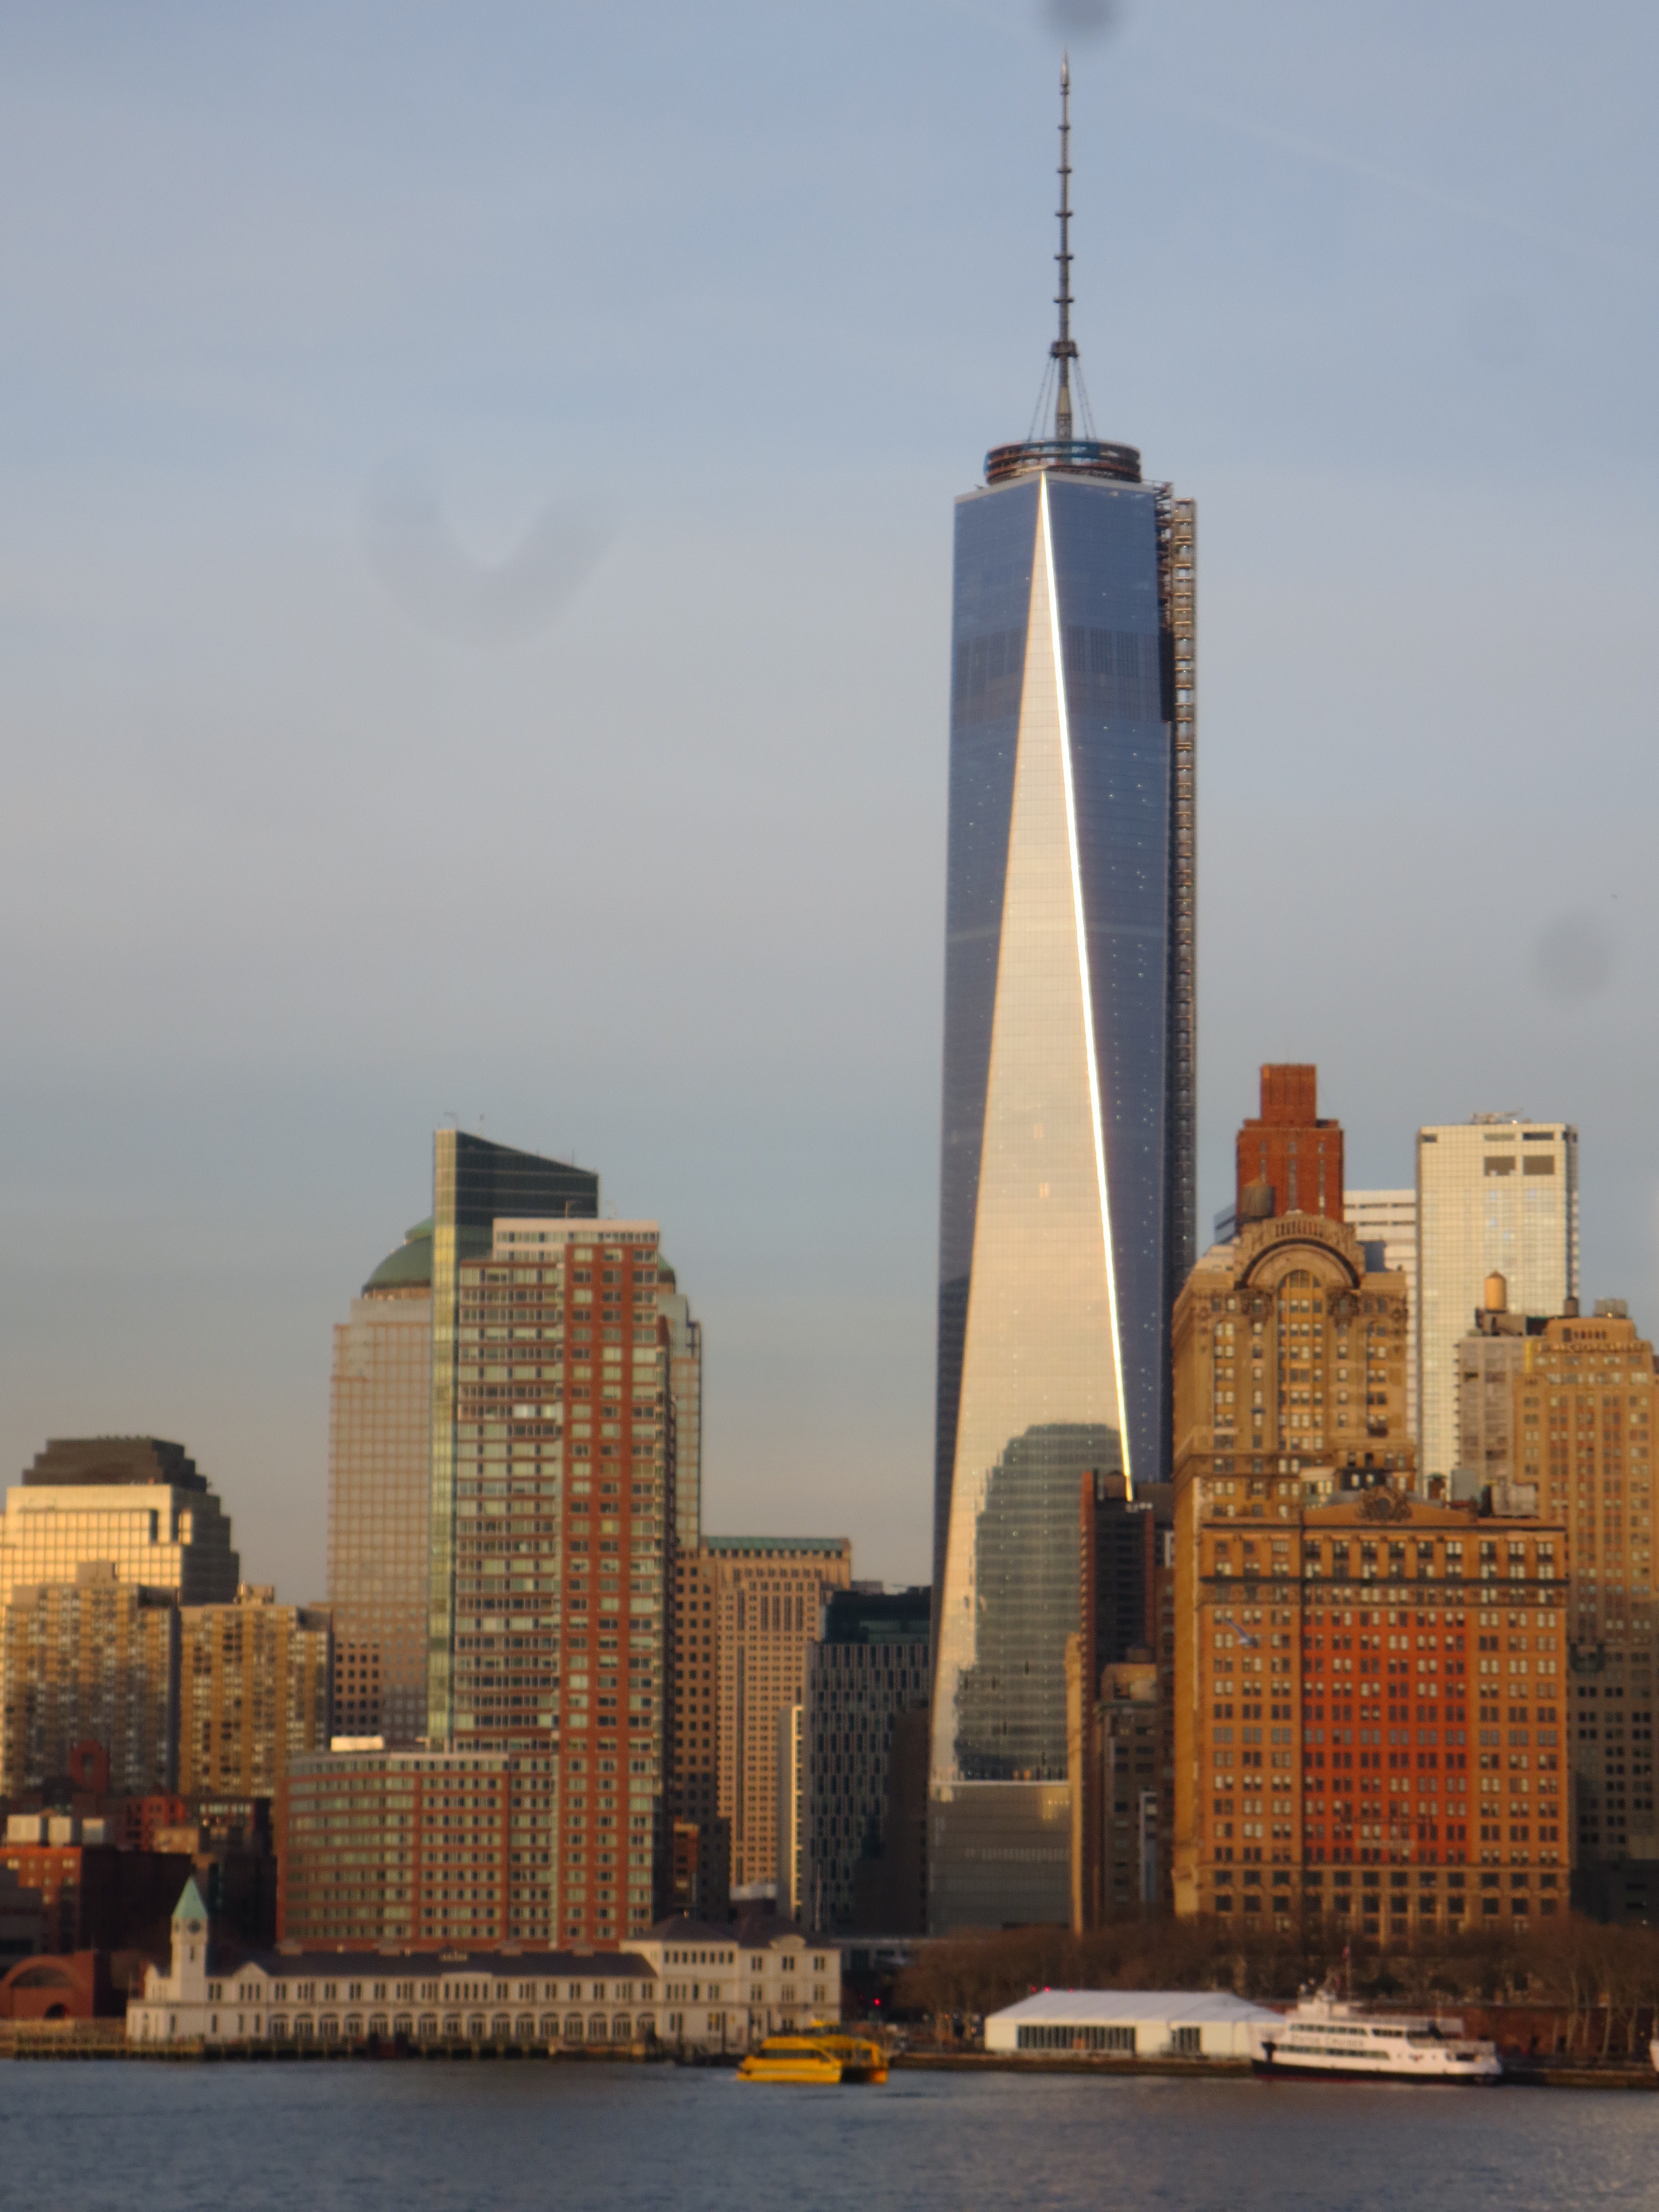 File:Freedom Tower World Trade Center NYC.jpg - Wikimedia Commons